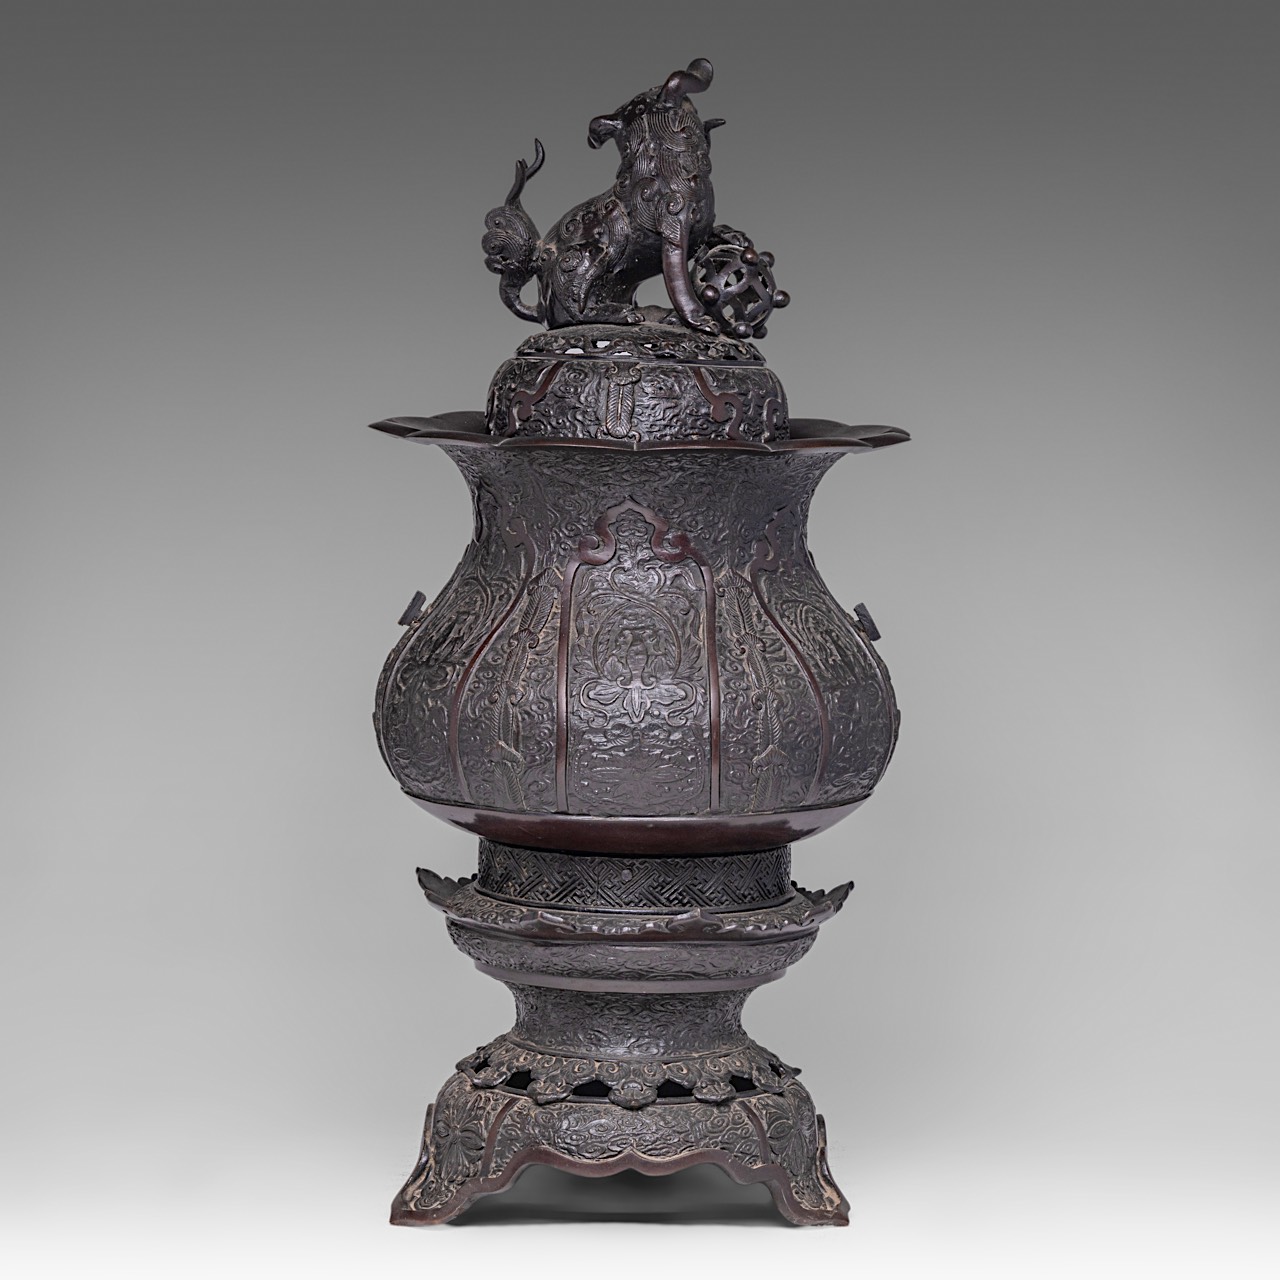 A large Japanese bronze censer with a shishi on top, Meiji period (1868-1912), H 60 cm - Image 3 of 9